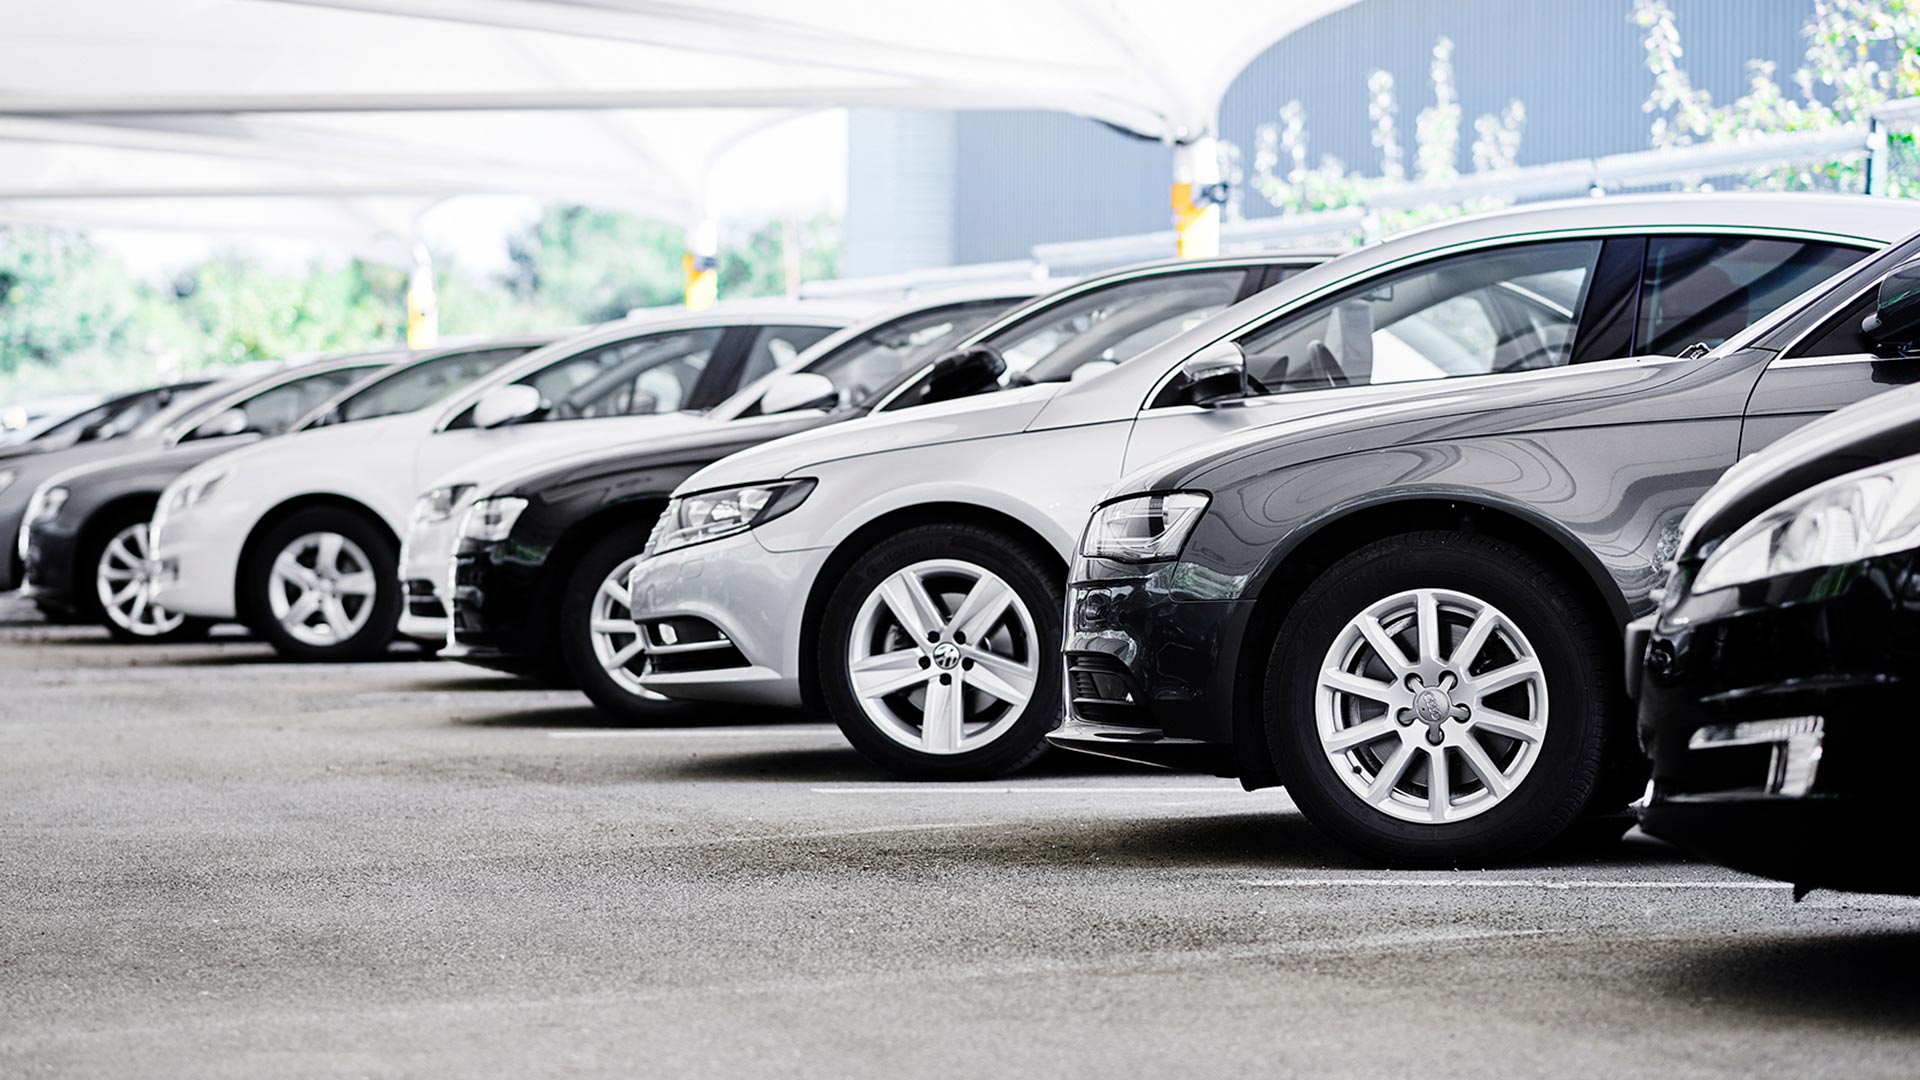 A fleet of silver, black and white cars lined up in a showroom, ready to be hired or leased